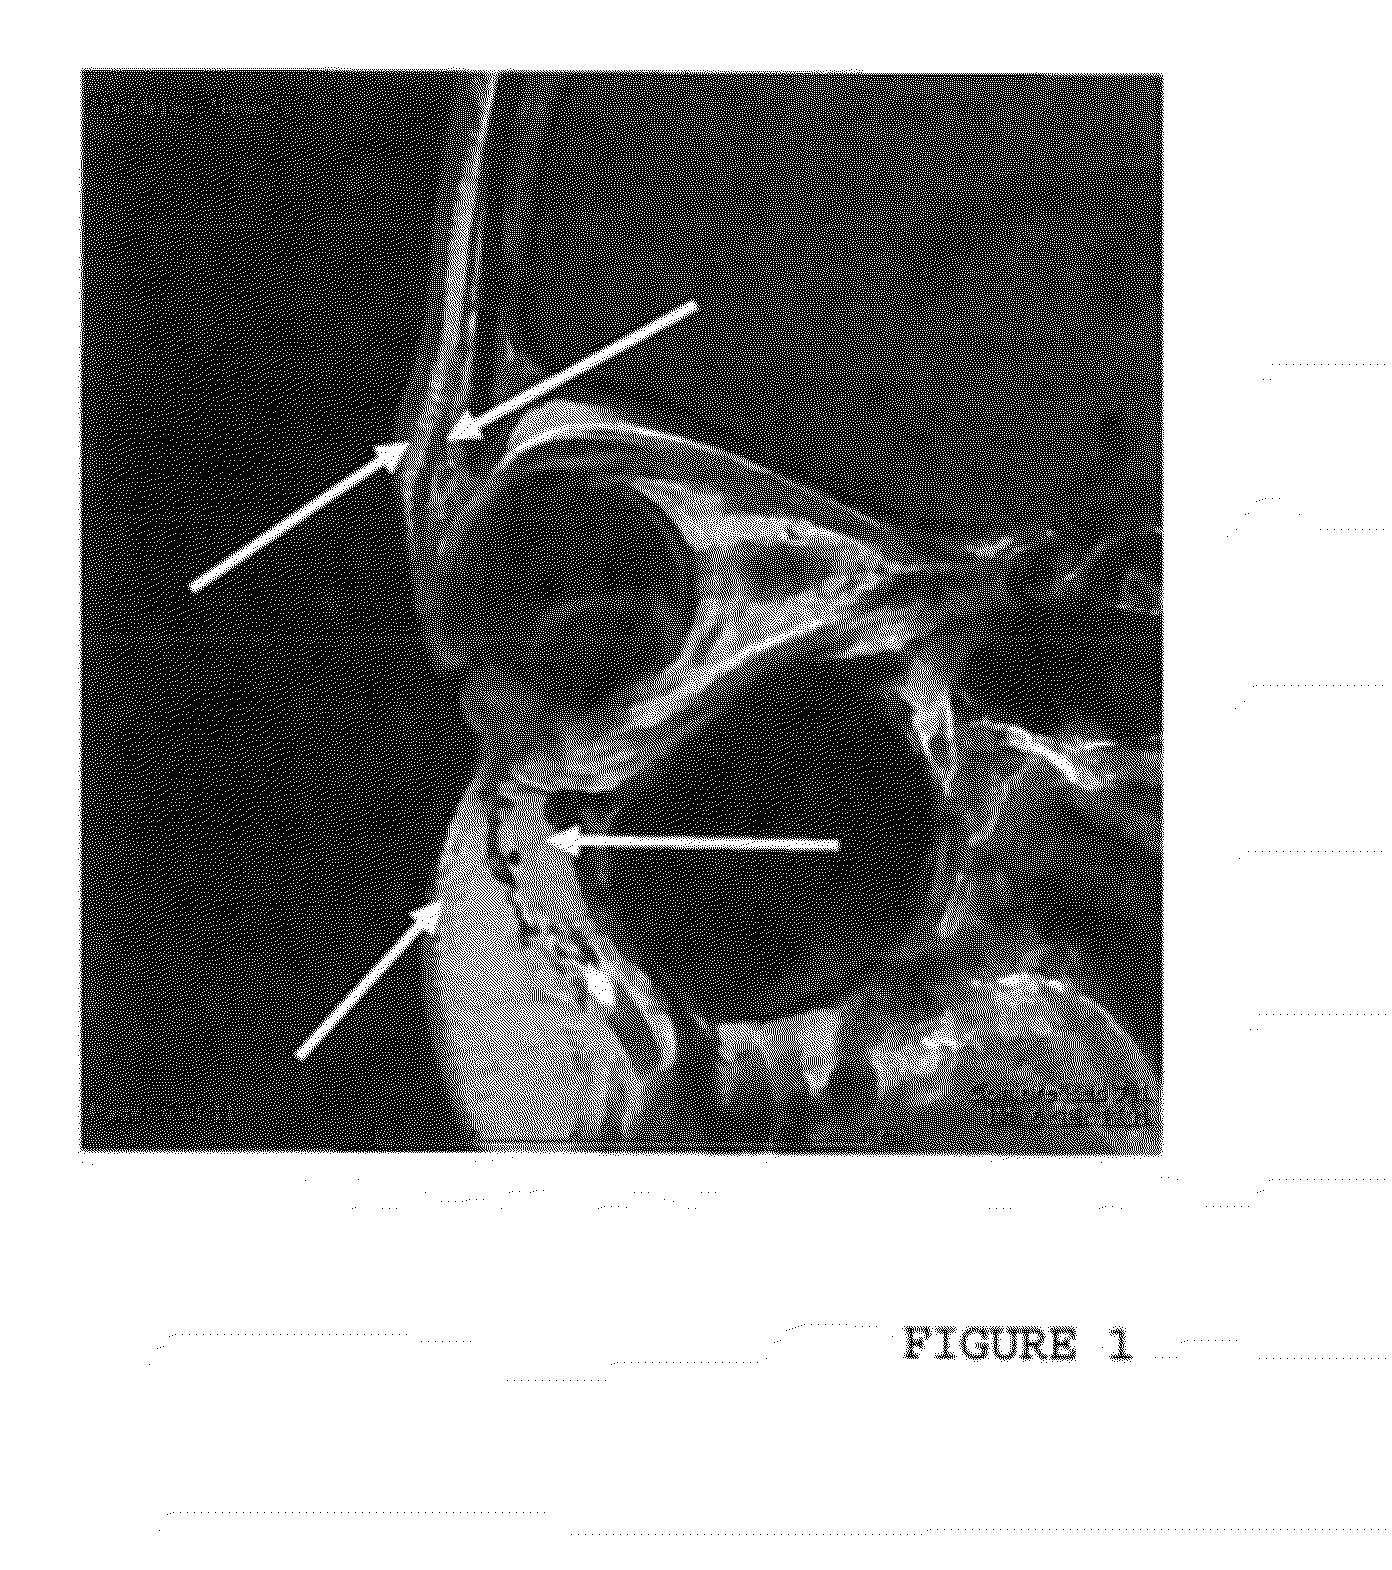 Extended Length Botulinum Toxin Formulation for Human or Mammalian Use